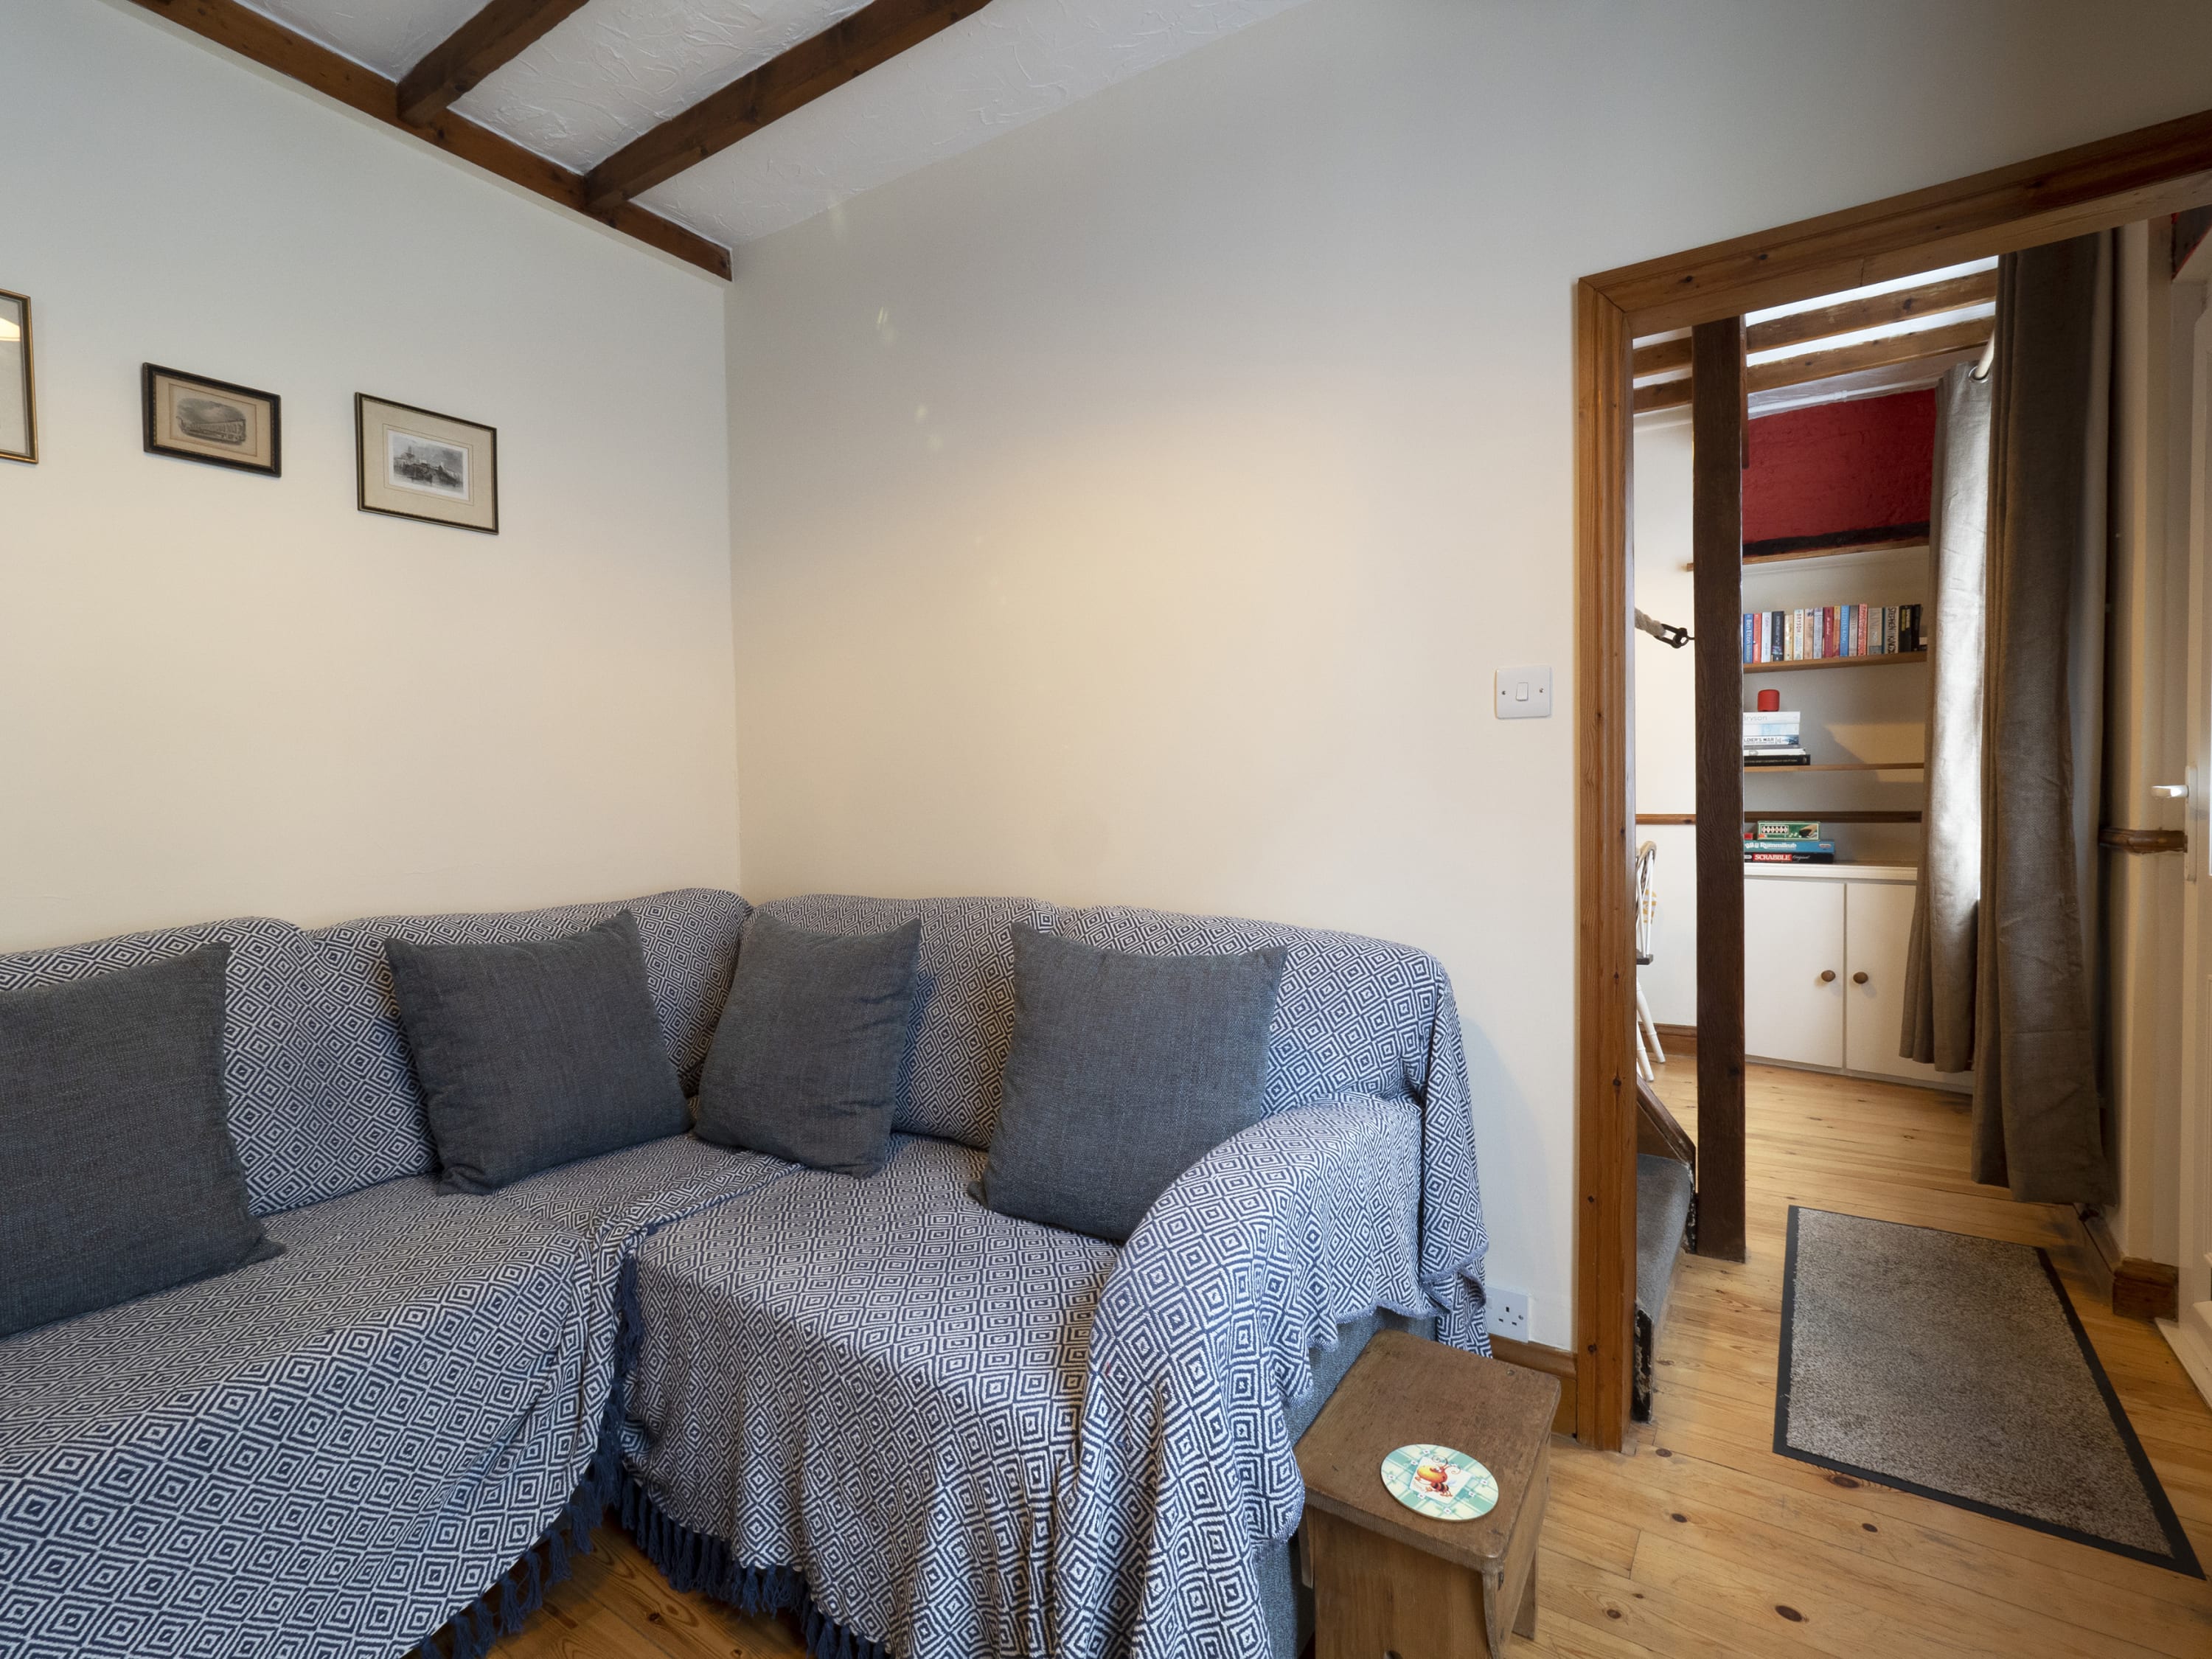 Property Image 2 - Ethelbert Cottage - Cosy seaside retreat in the heart of Broadstairs